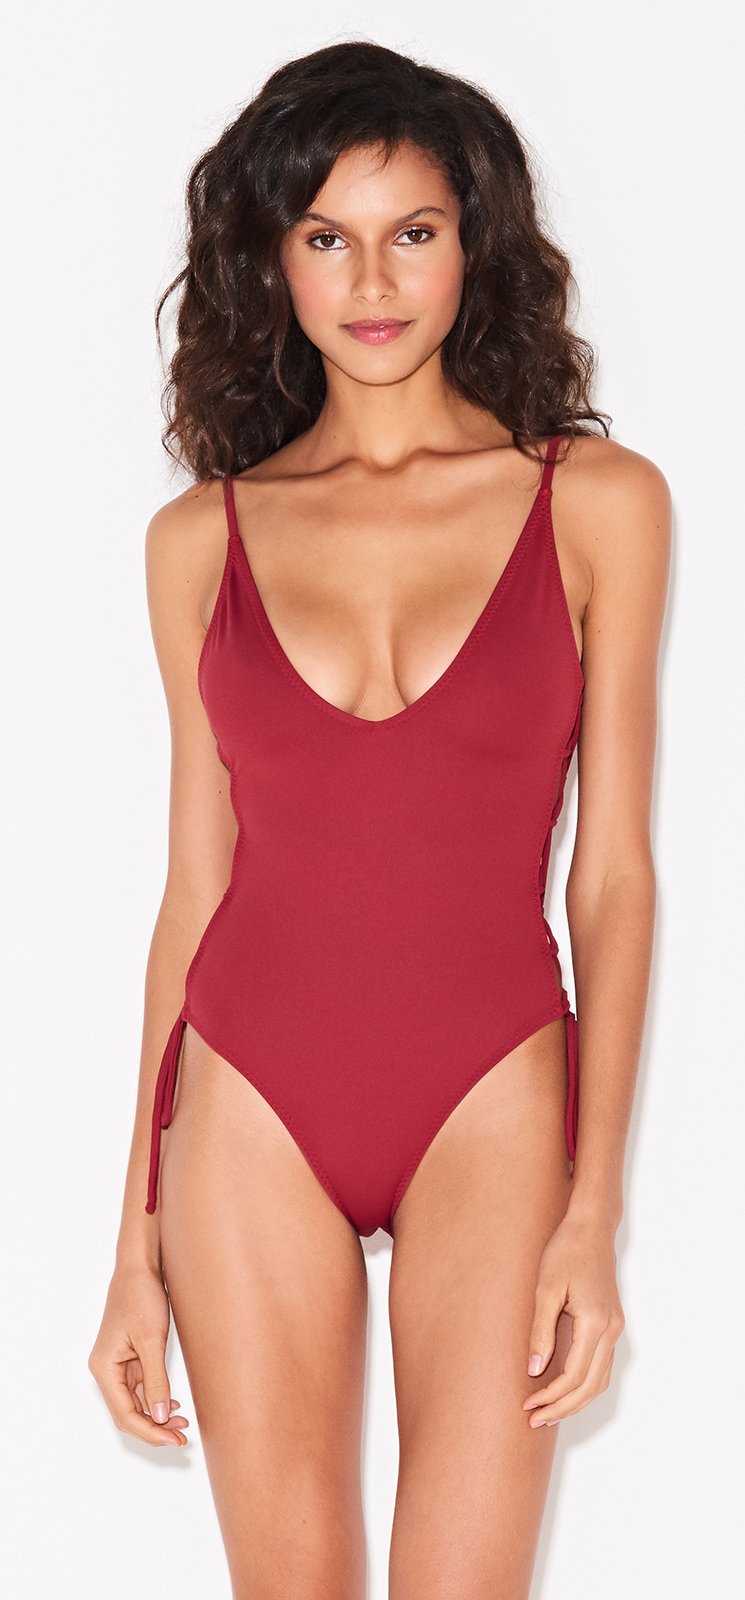 Red One Piece Swimsuit With Laced Sides Lacinho Vermelho Triya Free Download Nude Photo Gallery 